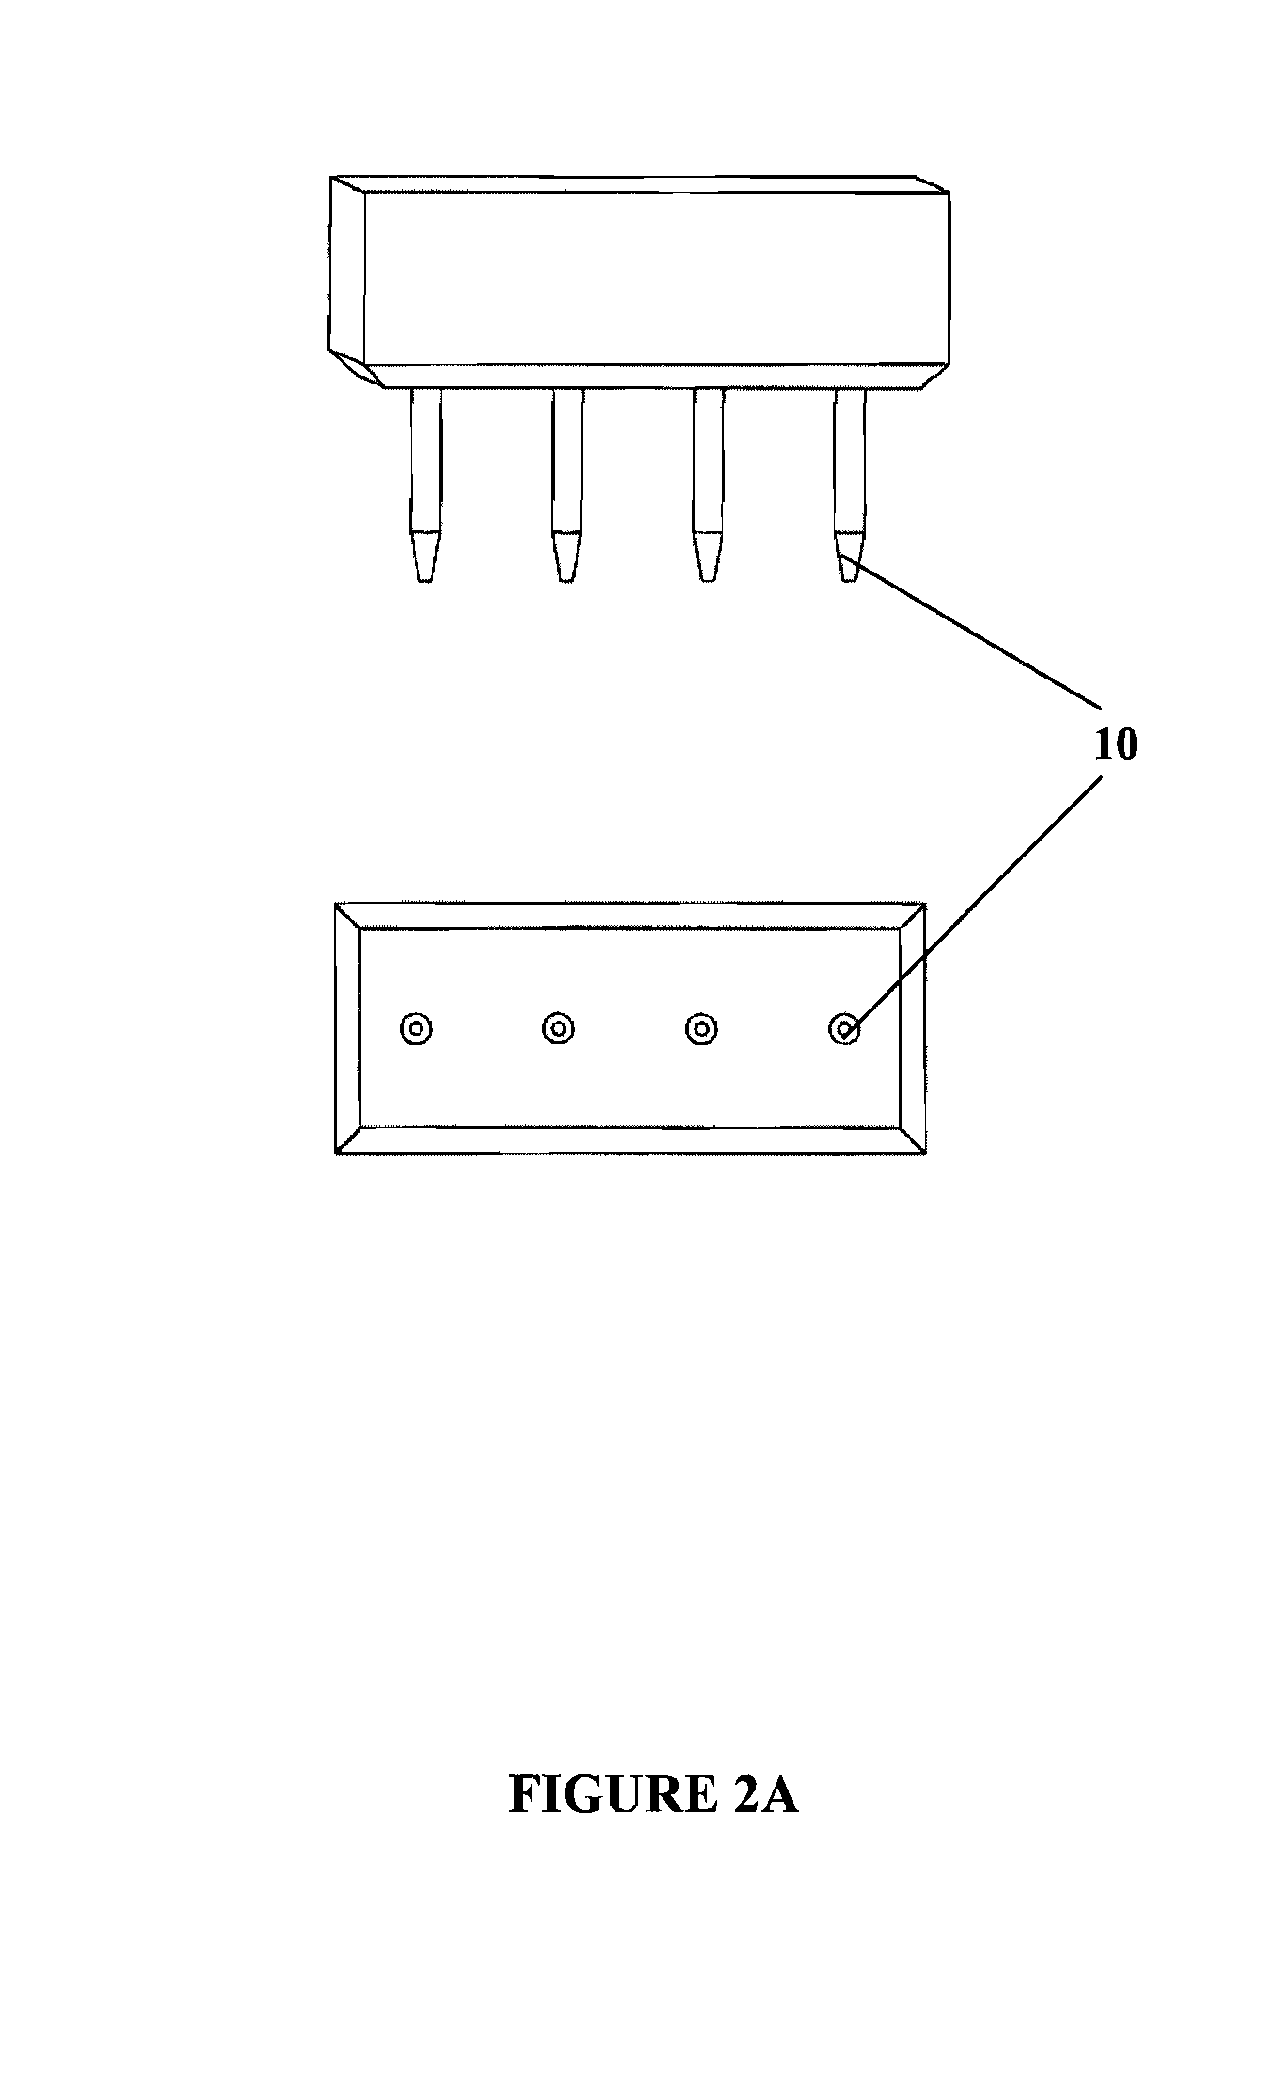 Aerosol Jet (R) Printing System for Photovoltaic Applications